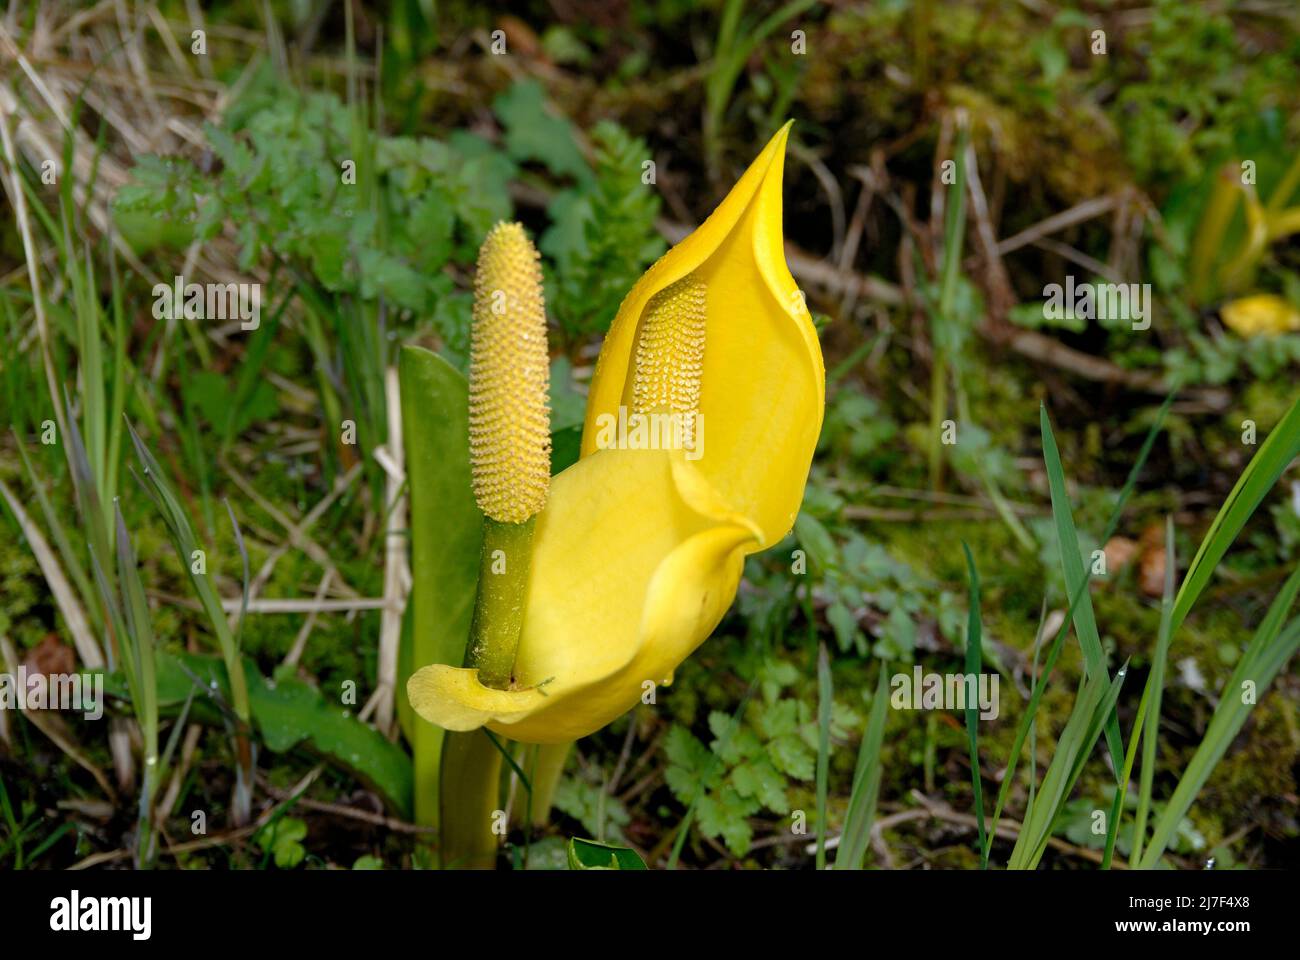 Skunk cabbage, so called because of its smell when damaged, is the first plant to bloom after winter. Stock Photo